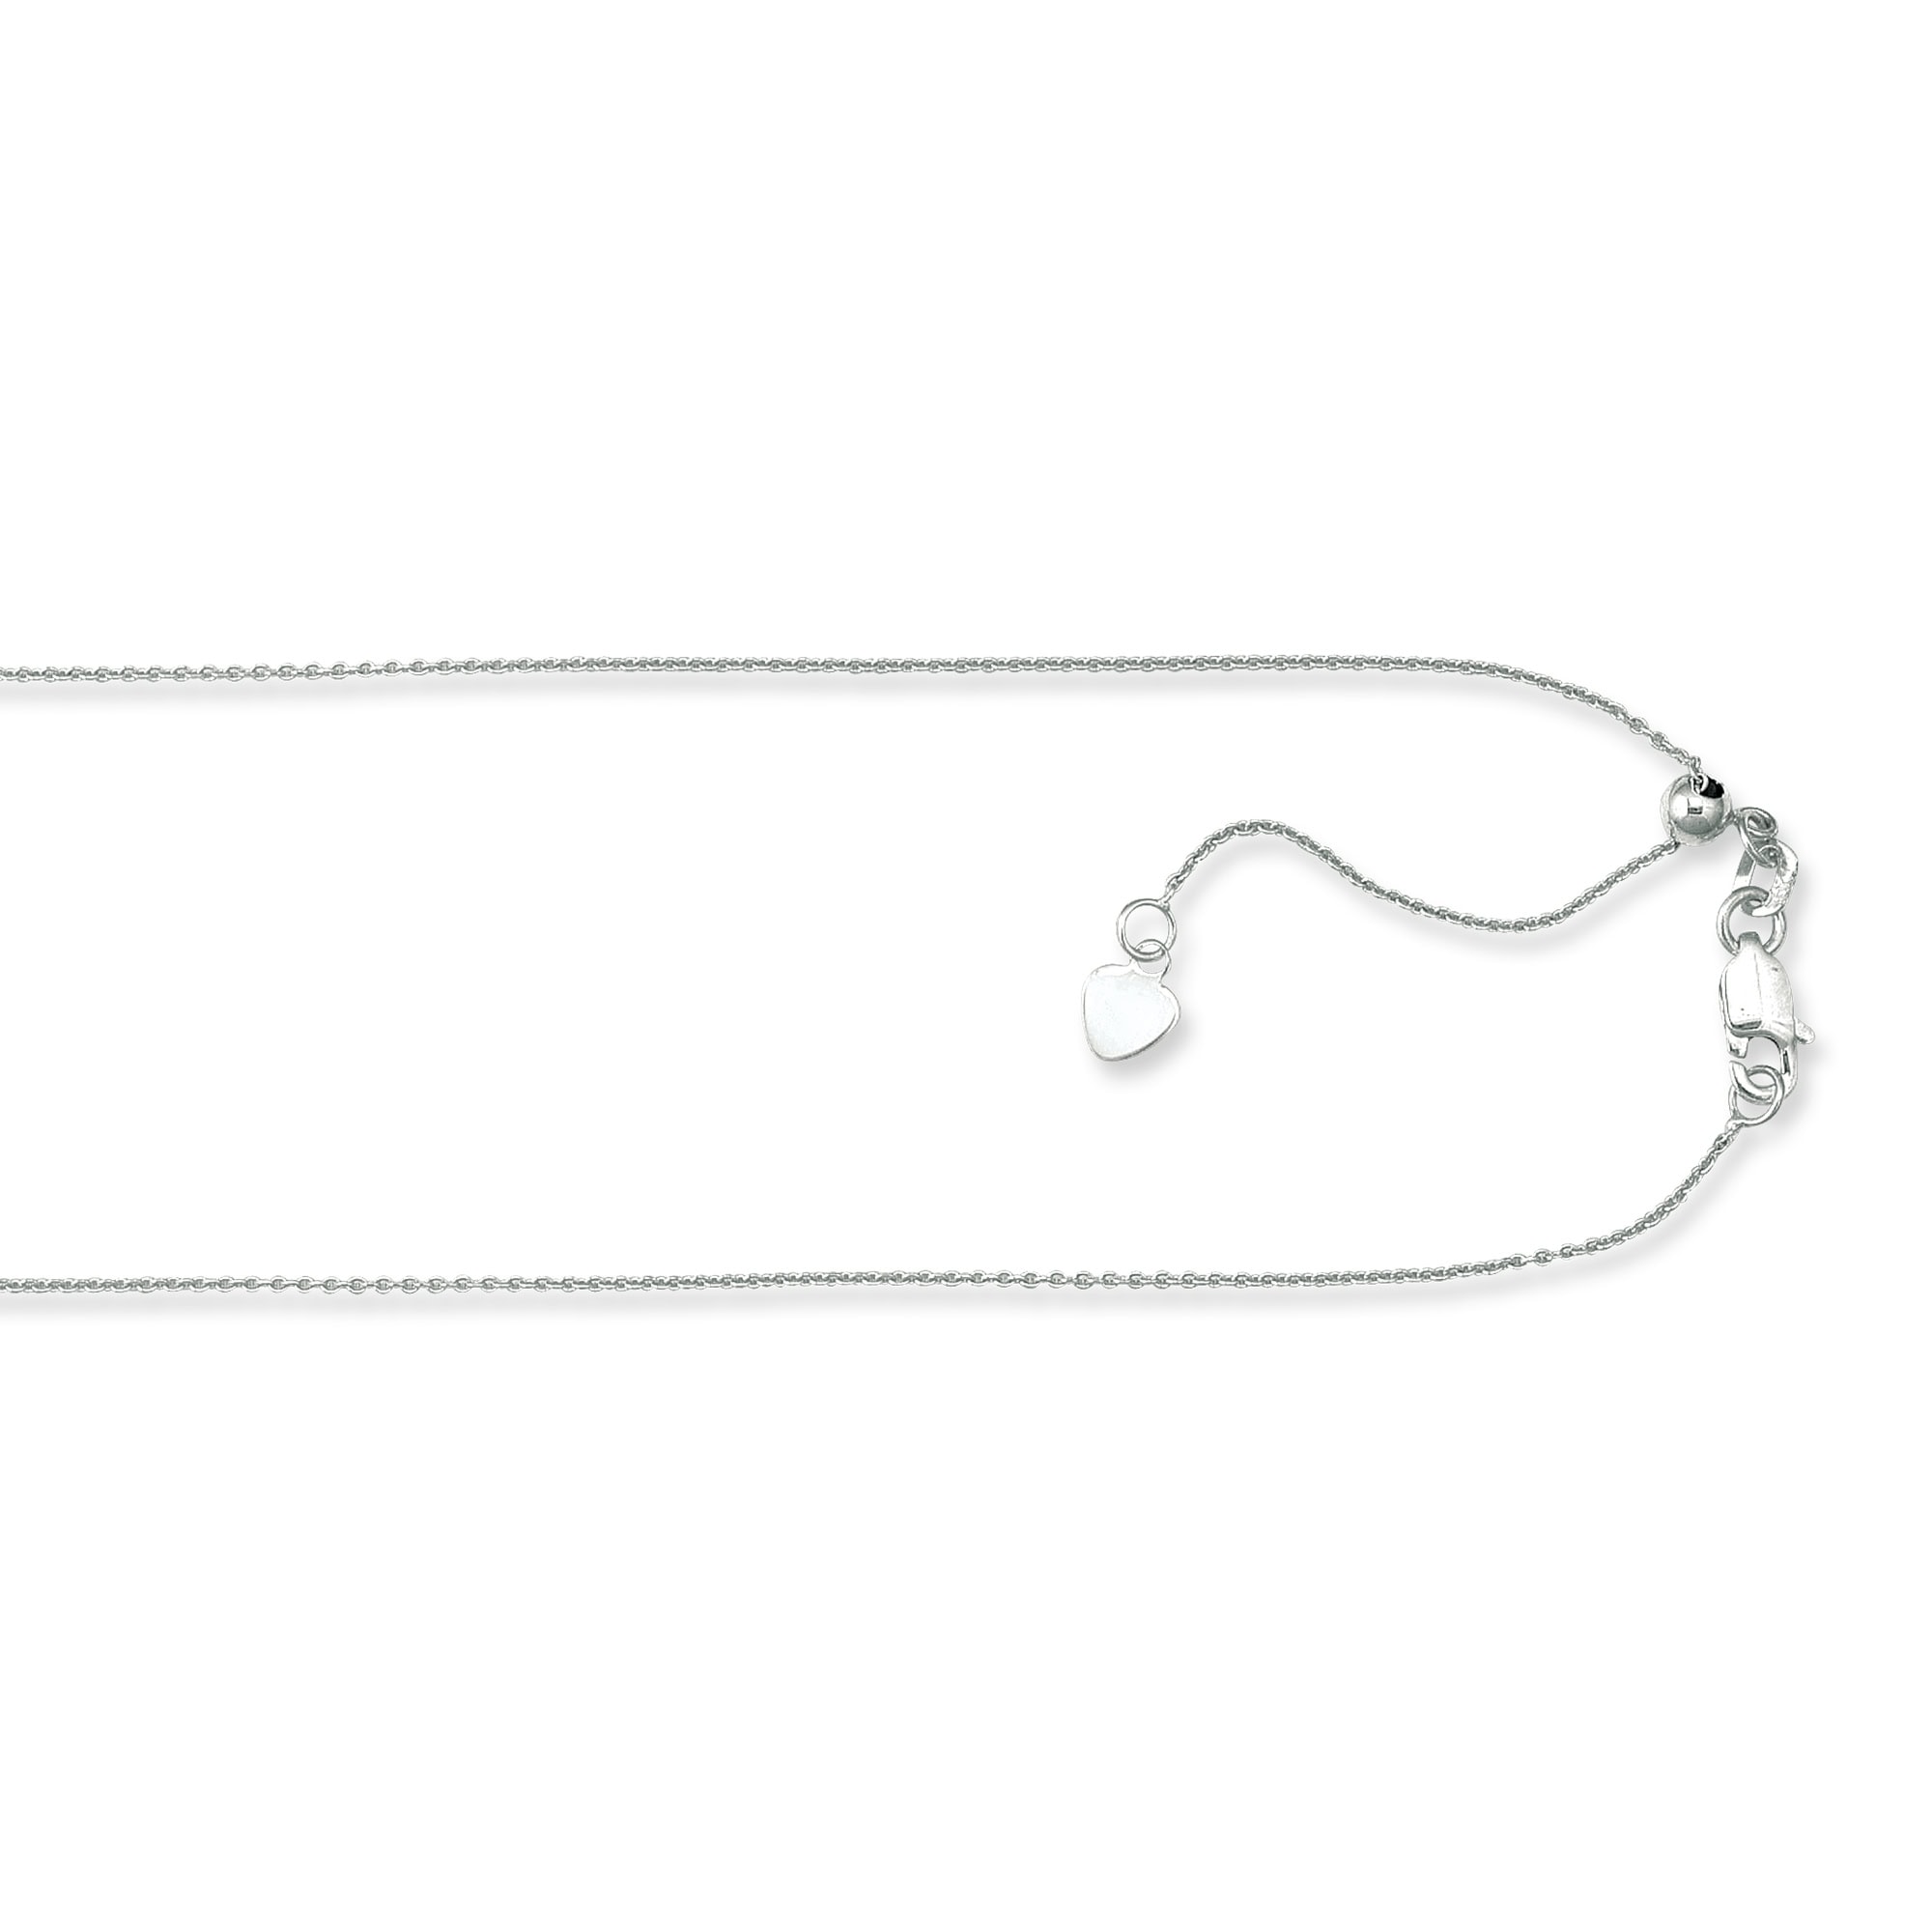 Silver 1.1mm Adjustable Cable Chain